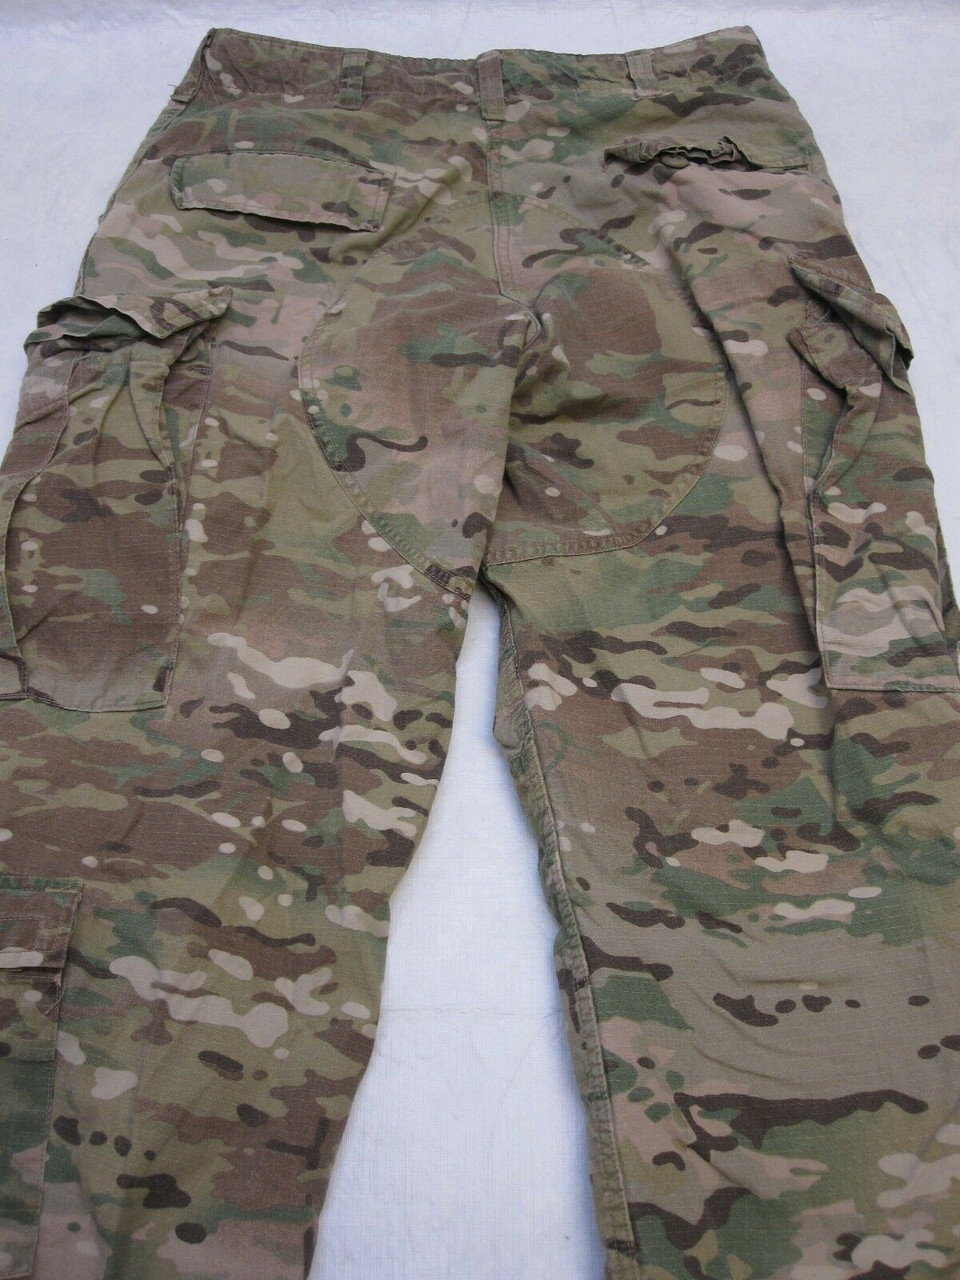 ORIGINAL OEF MULTICAM PANTS FLAME RESISTANT ARMY ISSUE